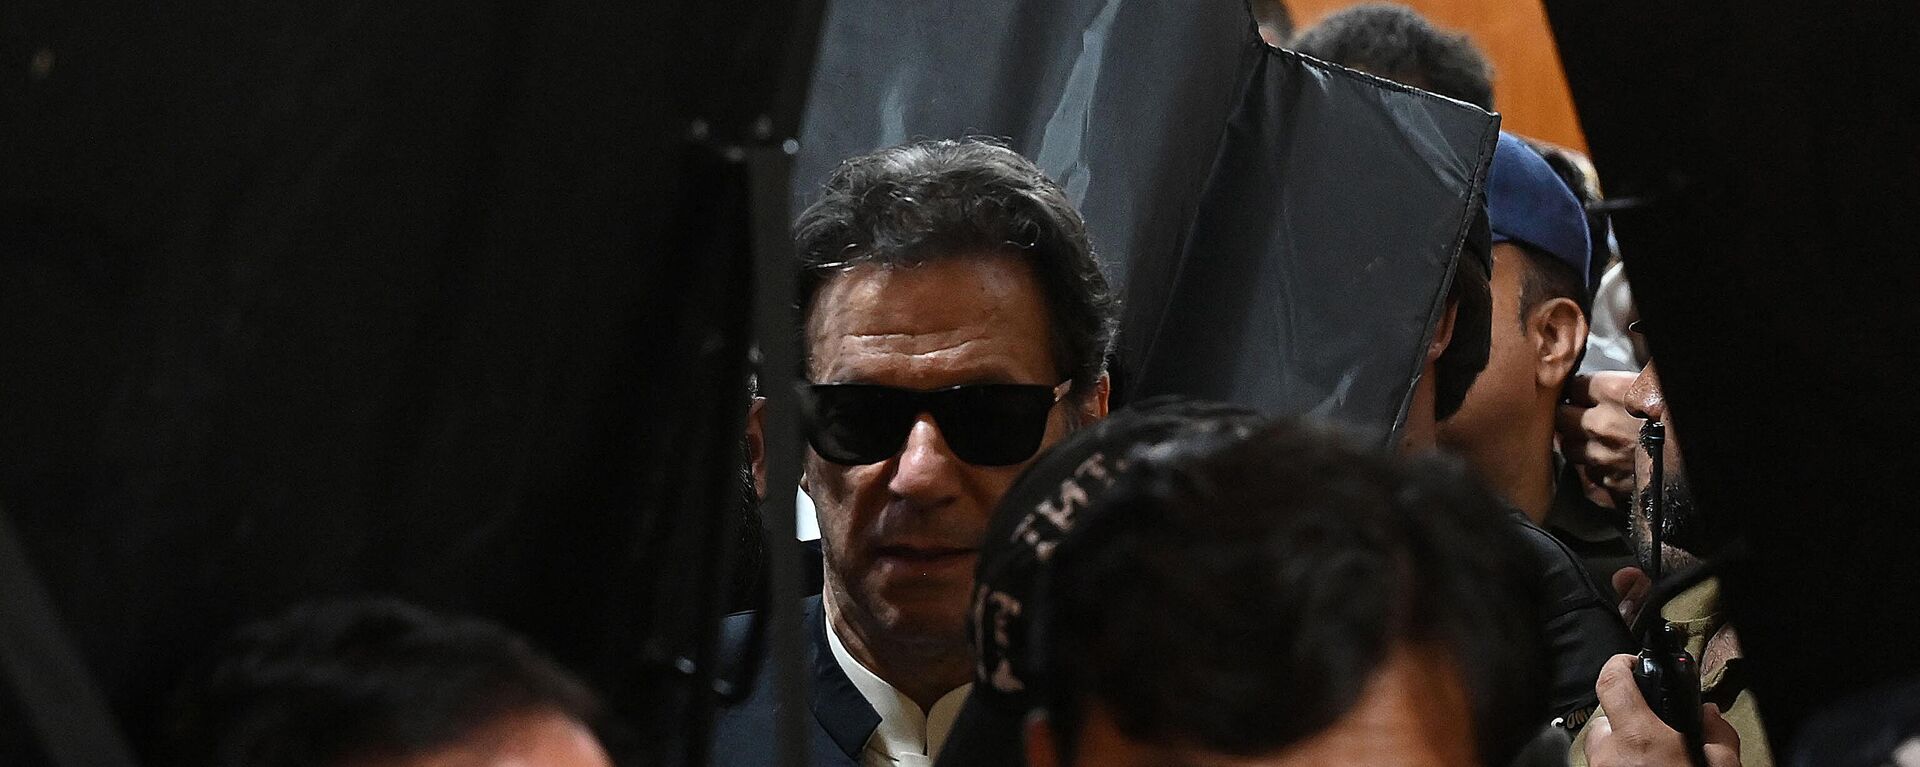 Security personnel with ballistic shields escort former Pakistan's prime minister Imran Khan (C) as he leaves after appearing at the High Court in Lahore on May 19, 2023. - Sputnik India, 1920, 23.05.2023